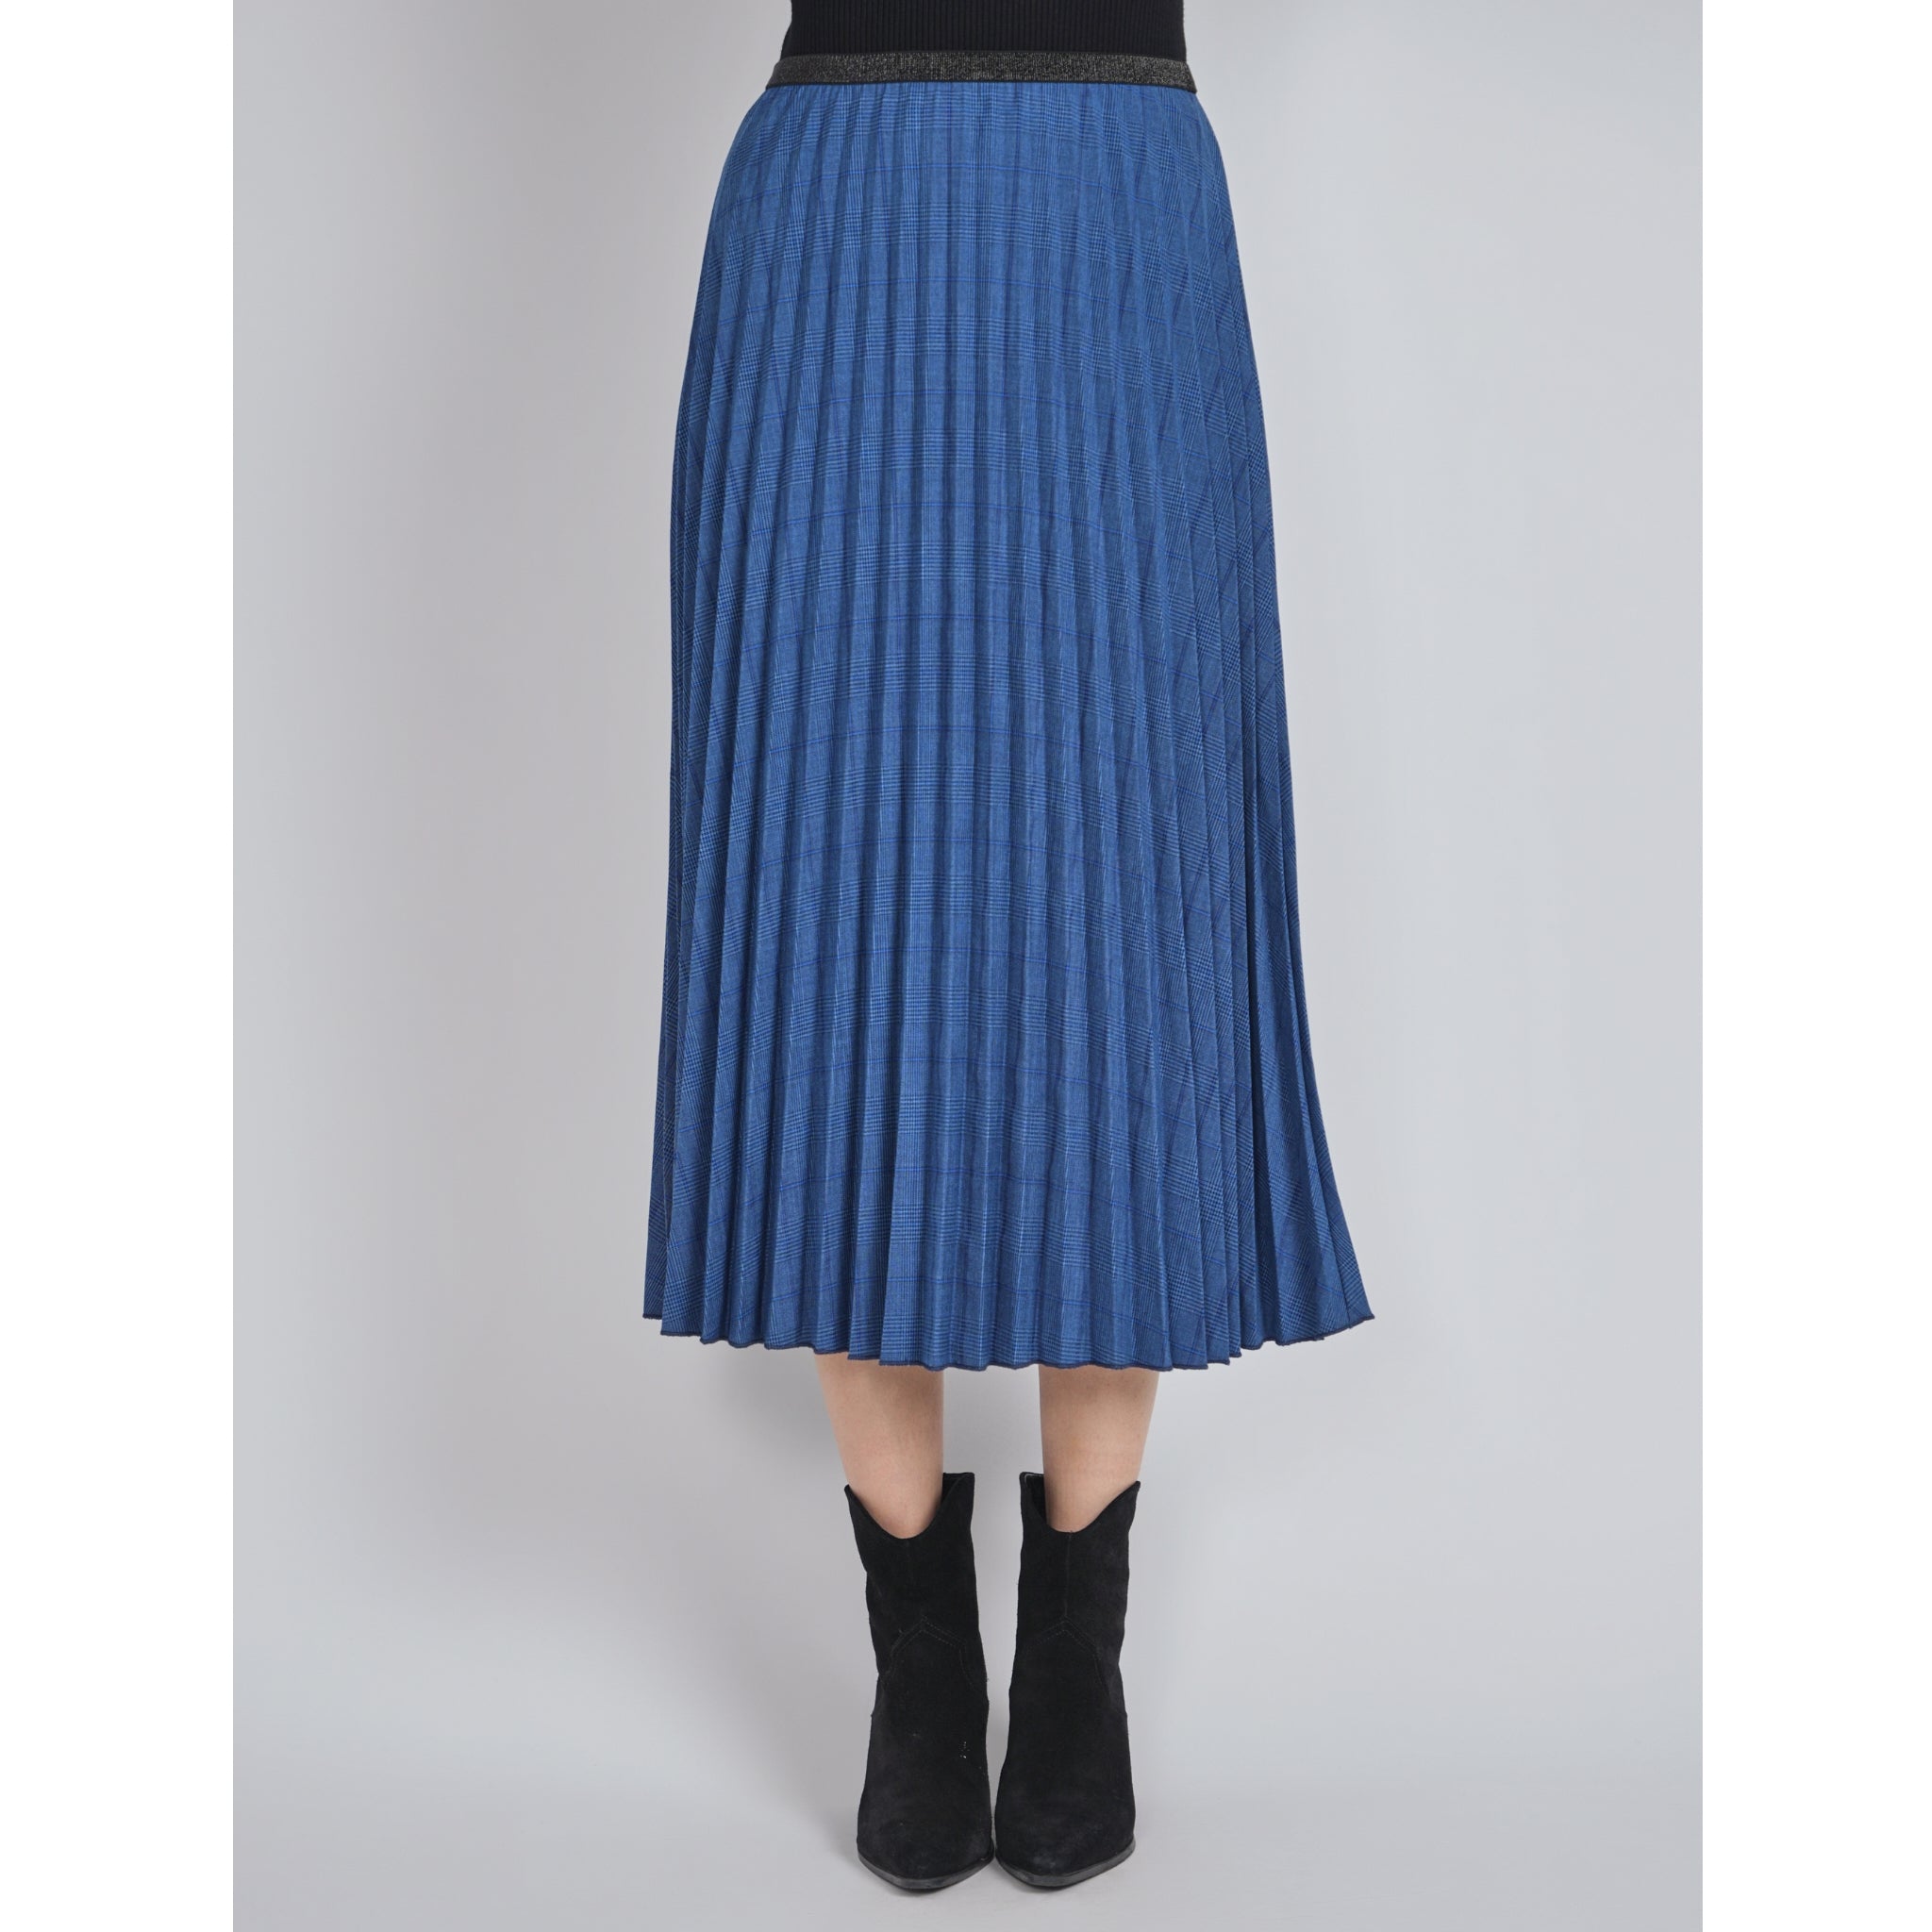 Blue Lightly Plaid Pleated Skirt By Yal The Mimi Boutique